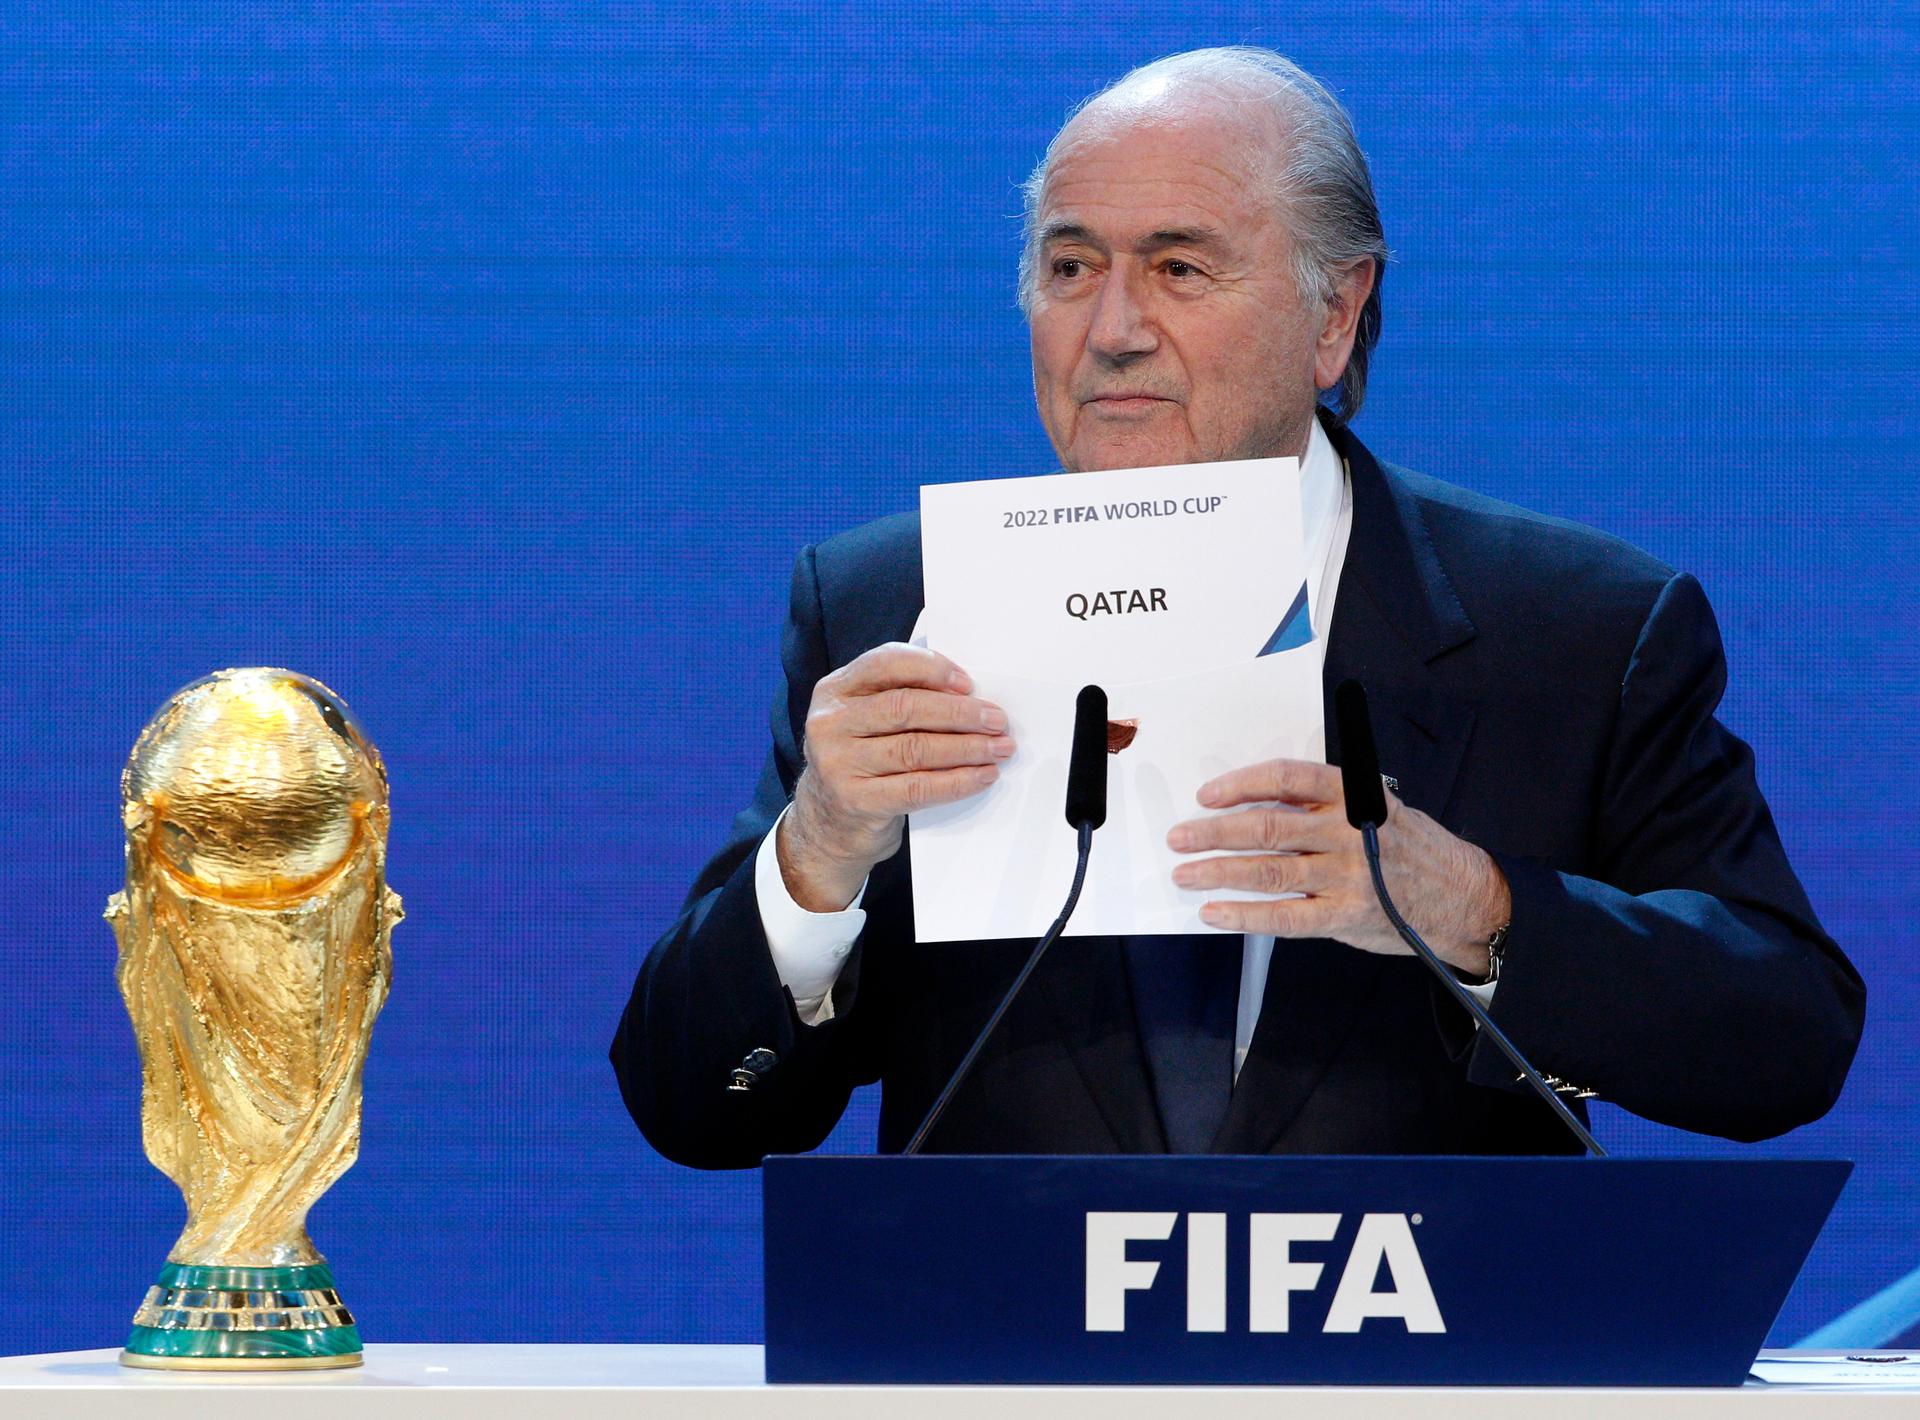 FIFA President Sepp Blatter announces that Qatar will host the 2022 World Cup. The choice has come under growing fire as corruption and labor abuse allegations have mounted.